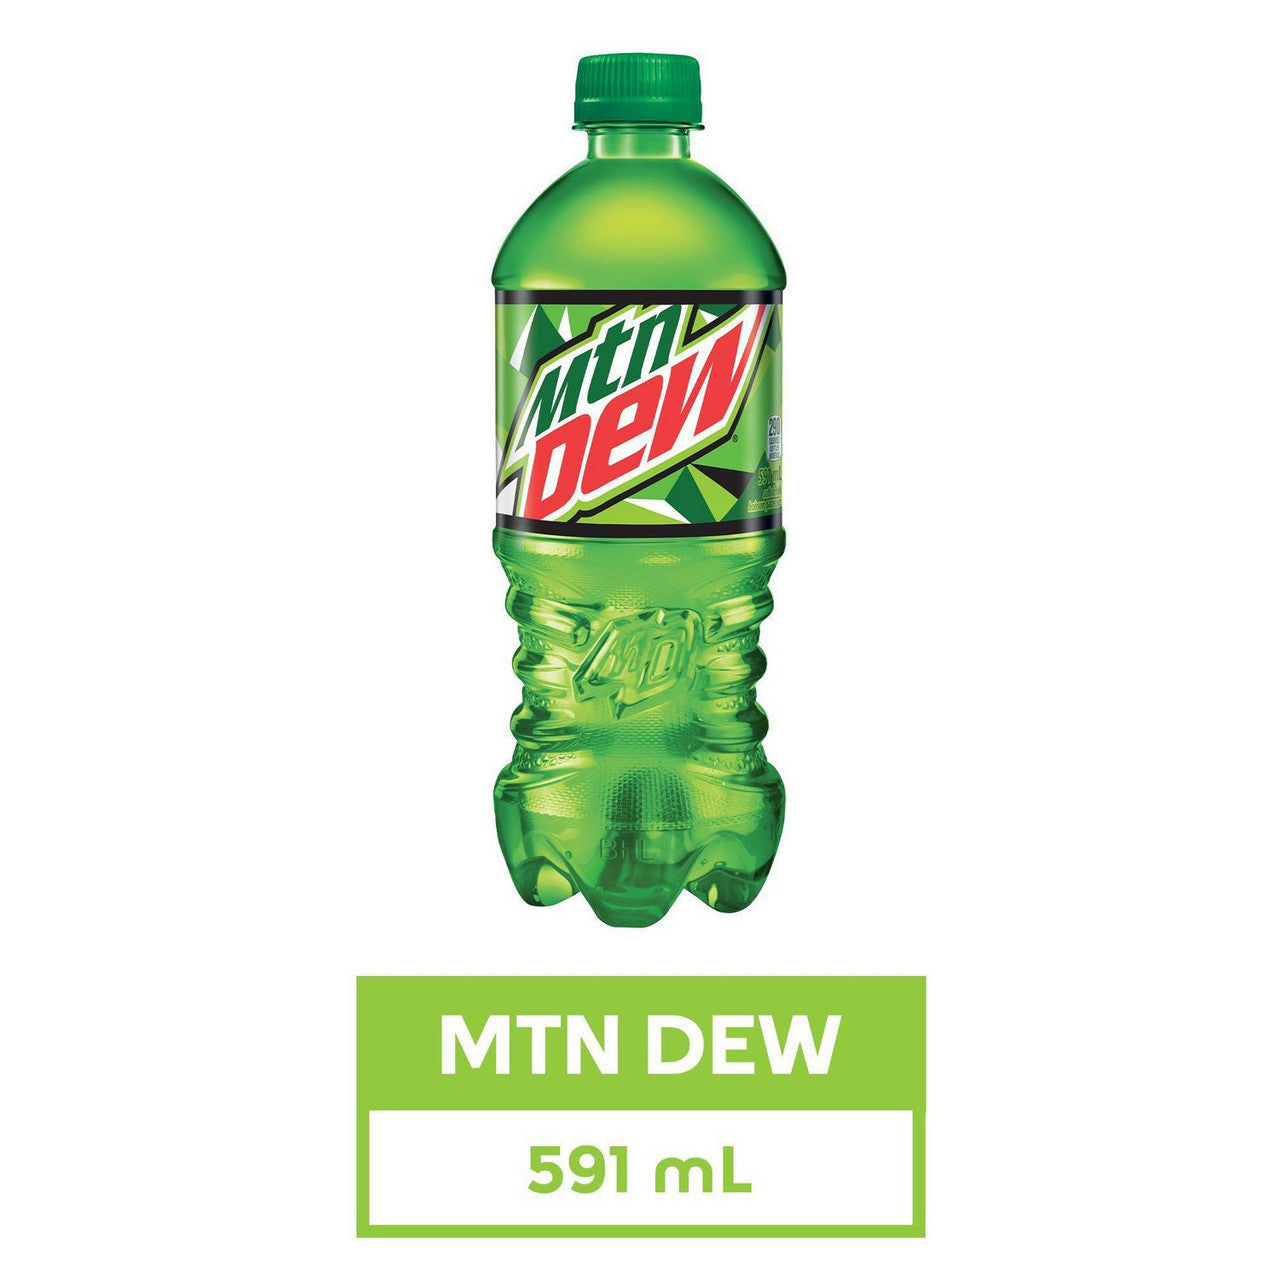 Canadian Mountain Dew 591ml/20oz bottle {Imported from Canada}